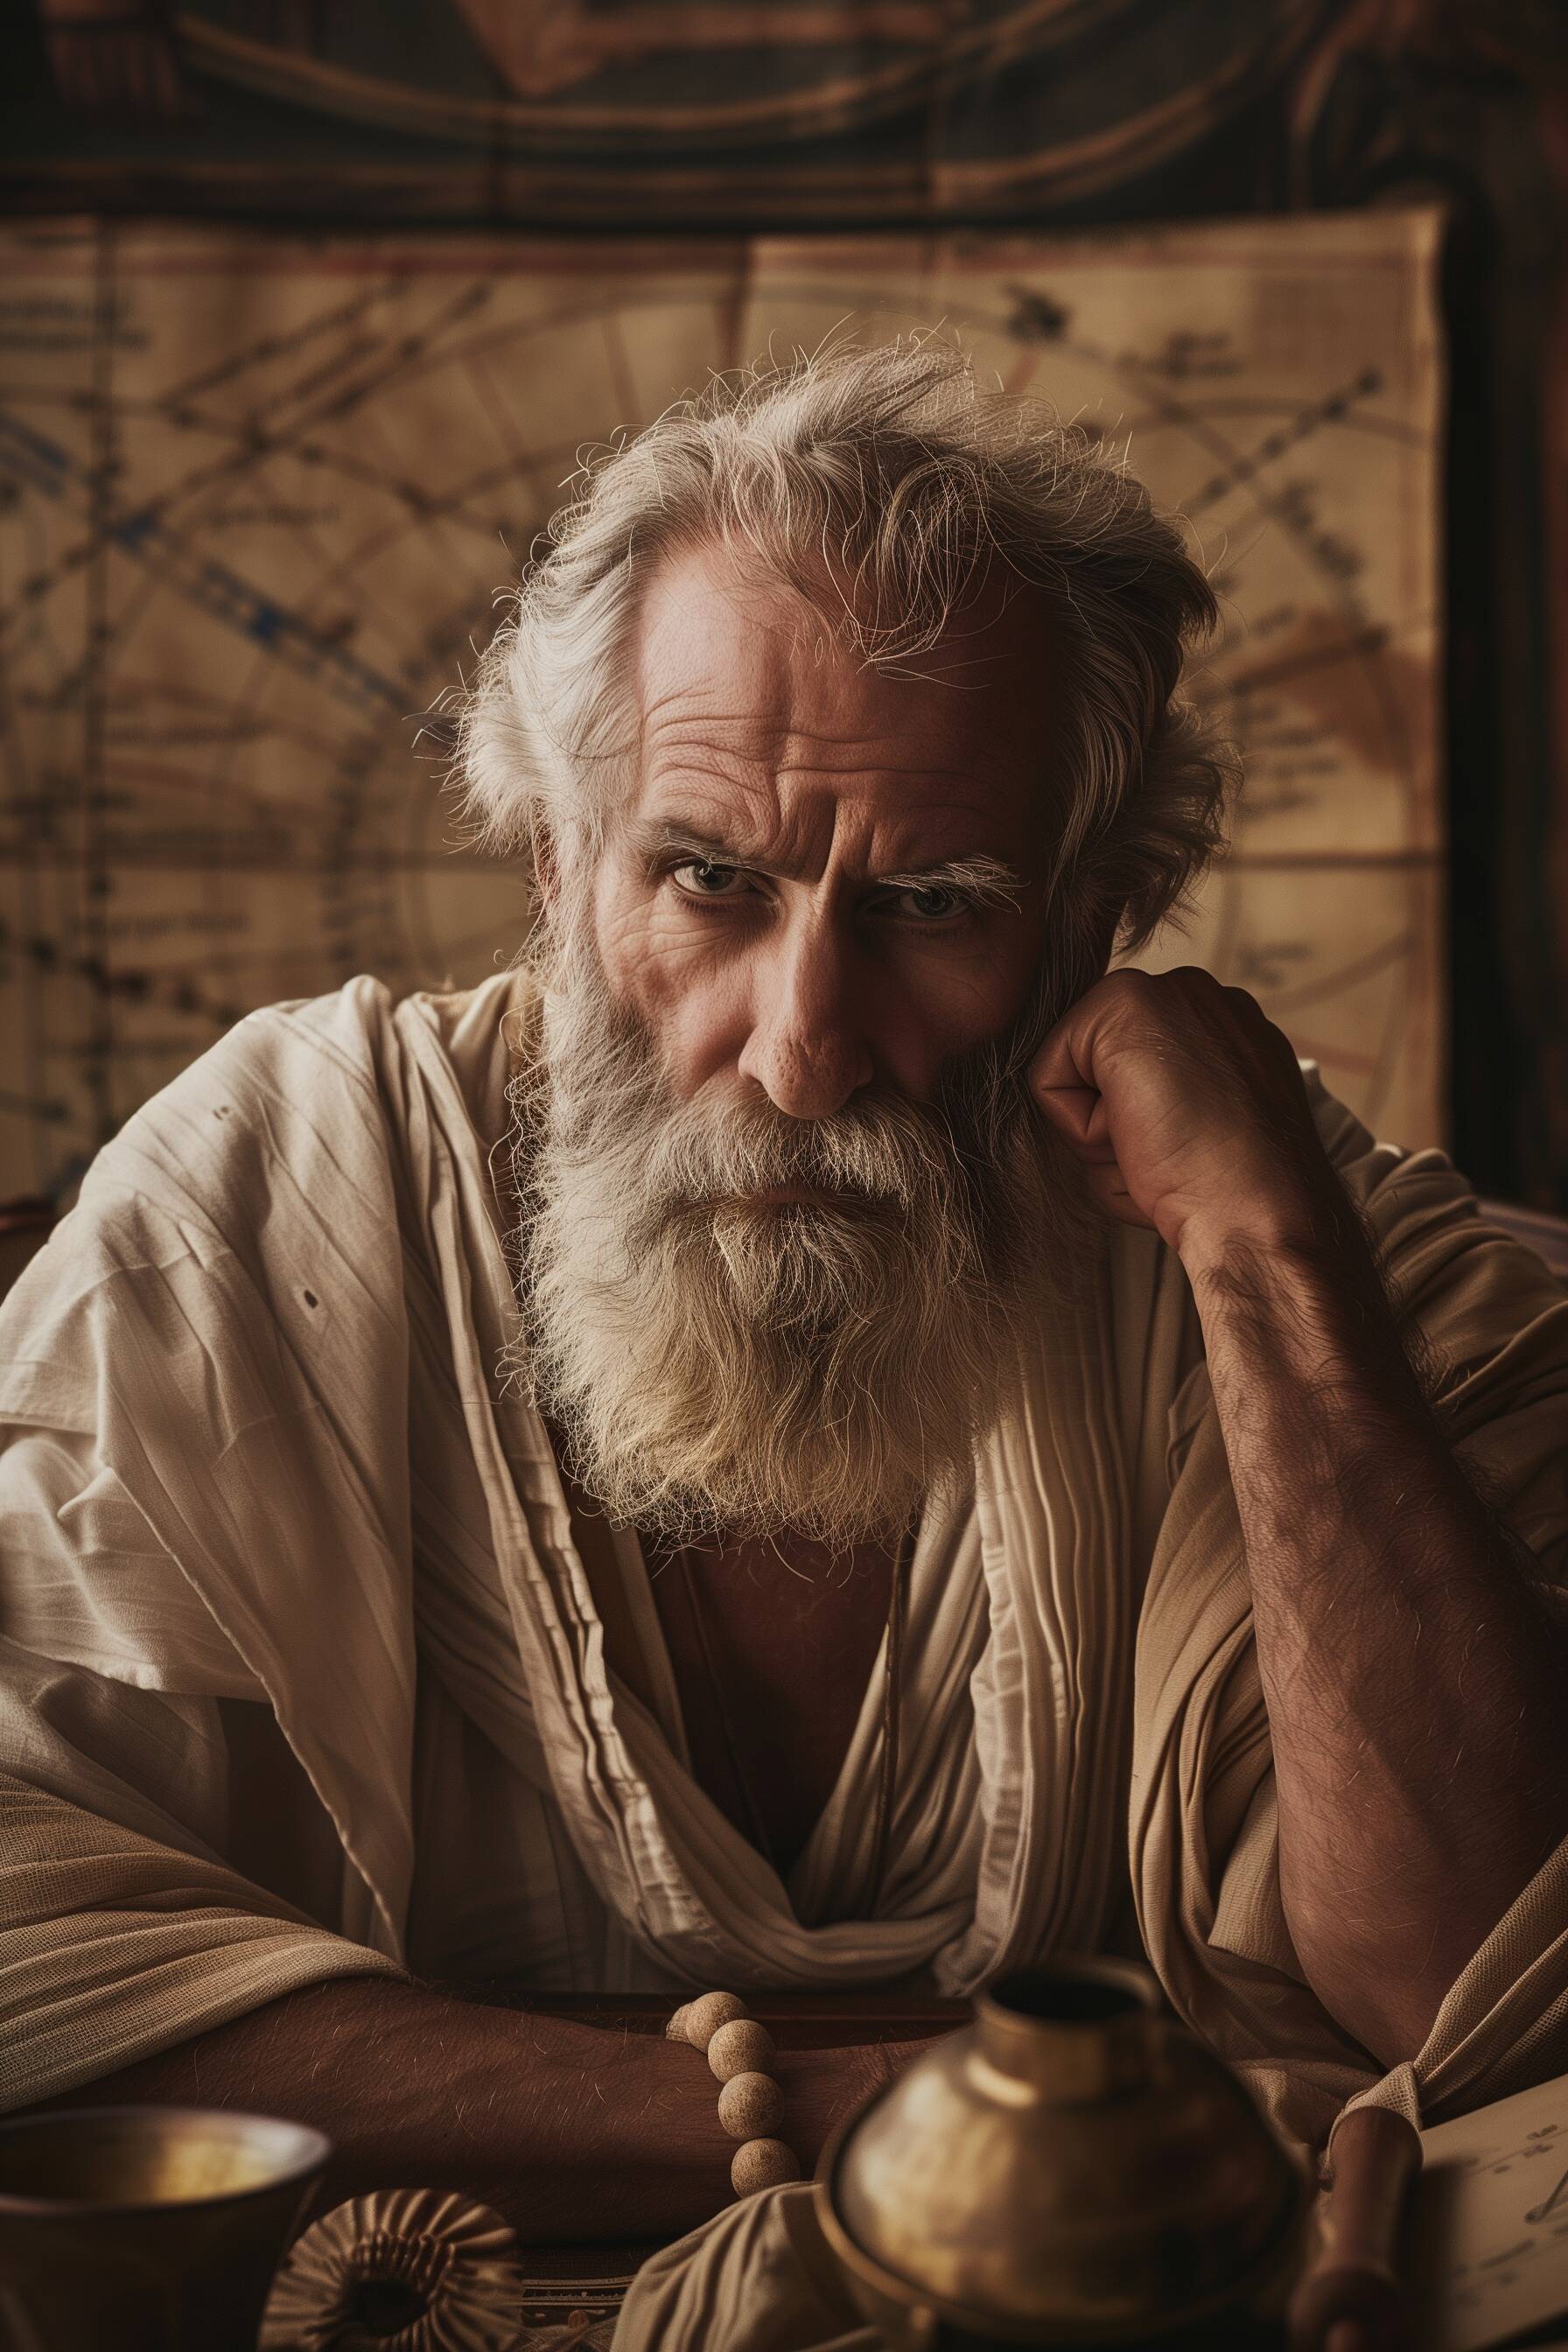 A possible portrait photo of Pythagoras, the Ancient Greek mathematician